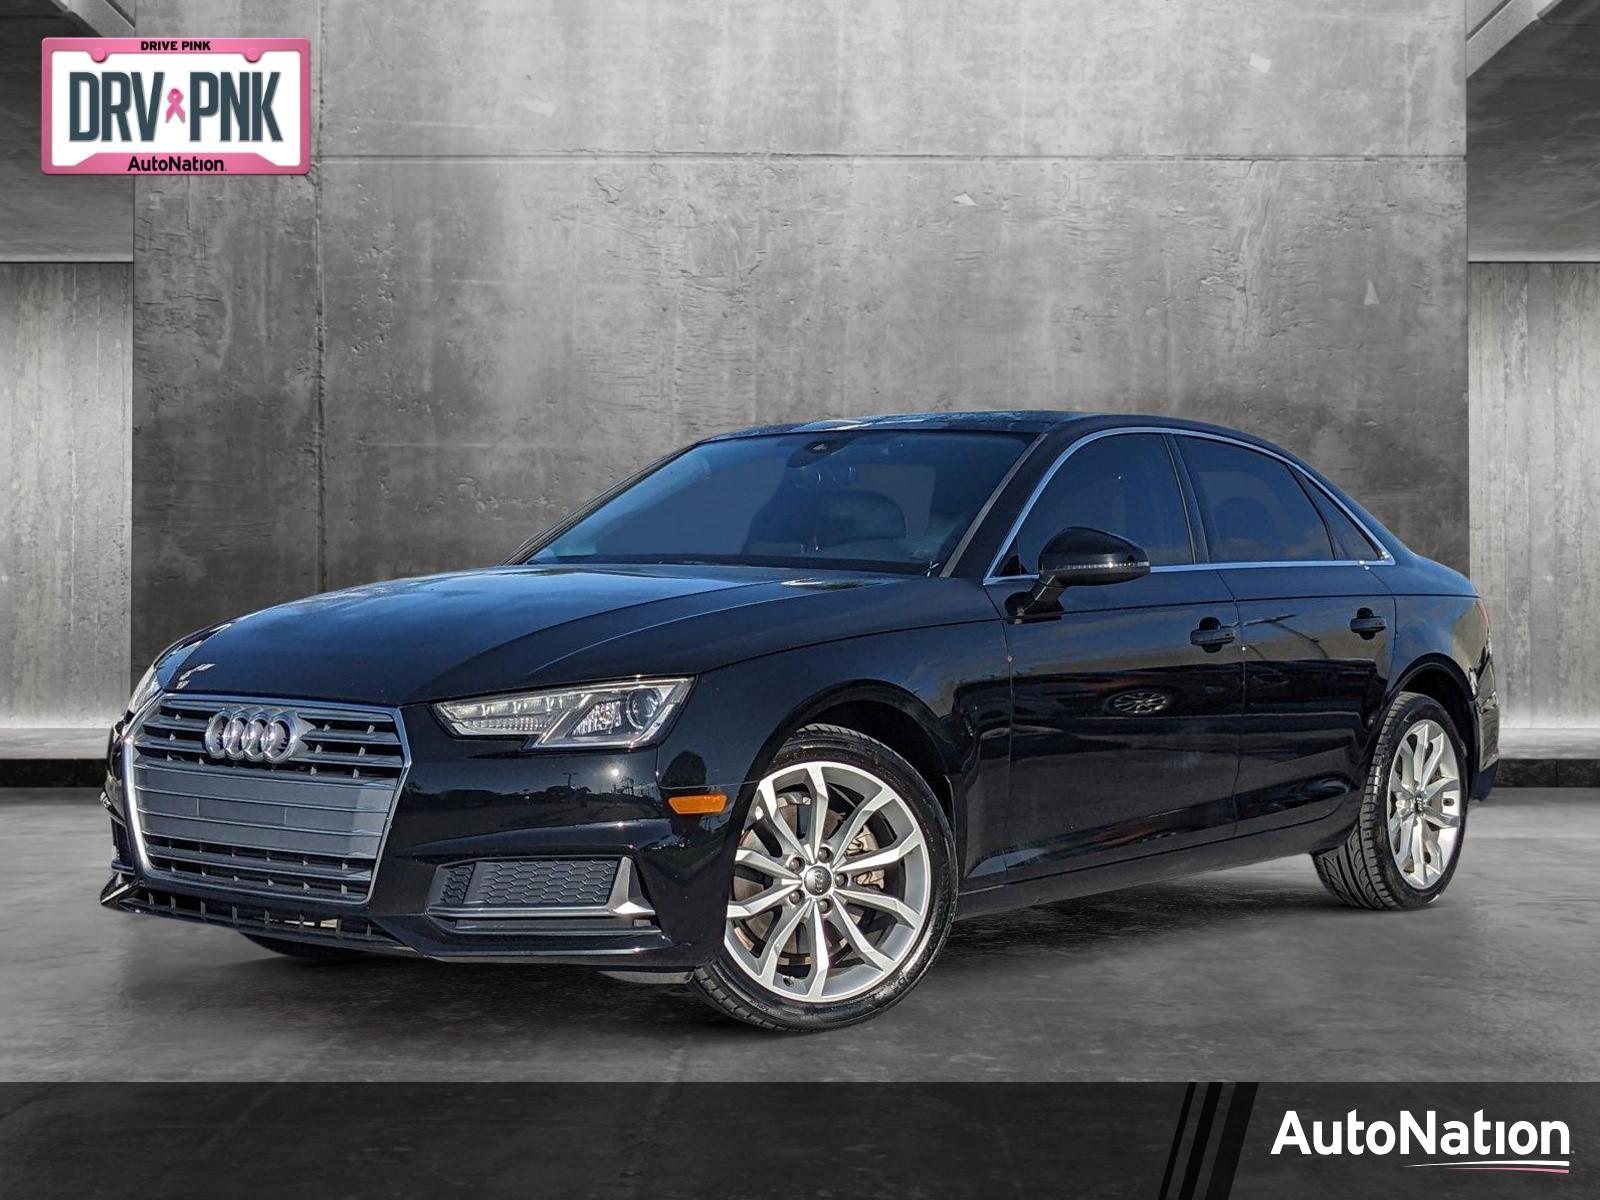 2019 Audi A4 Vehicle Photo in Hollywood, FL 33021